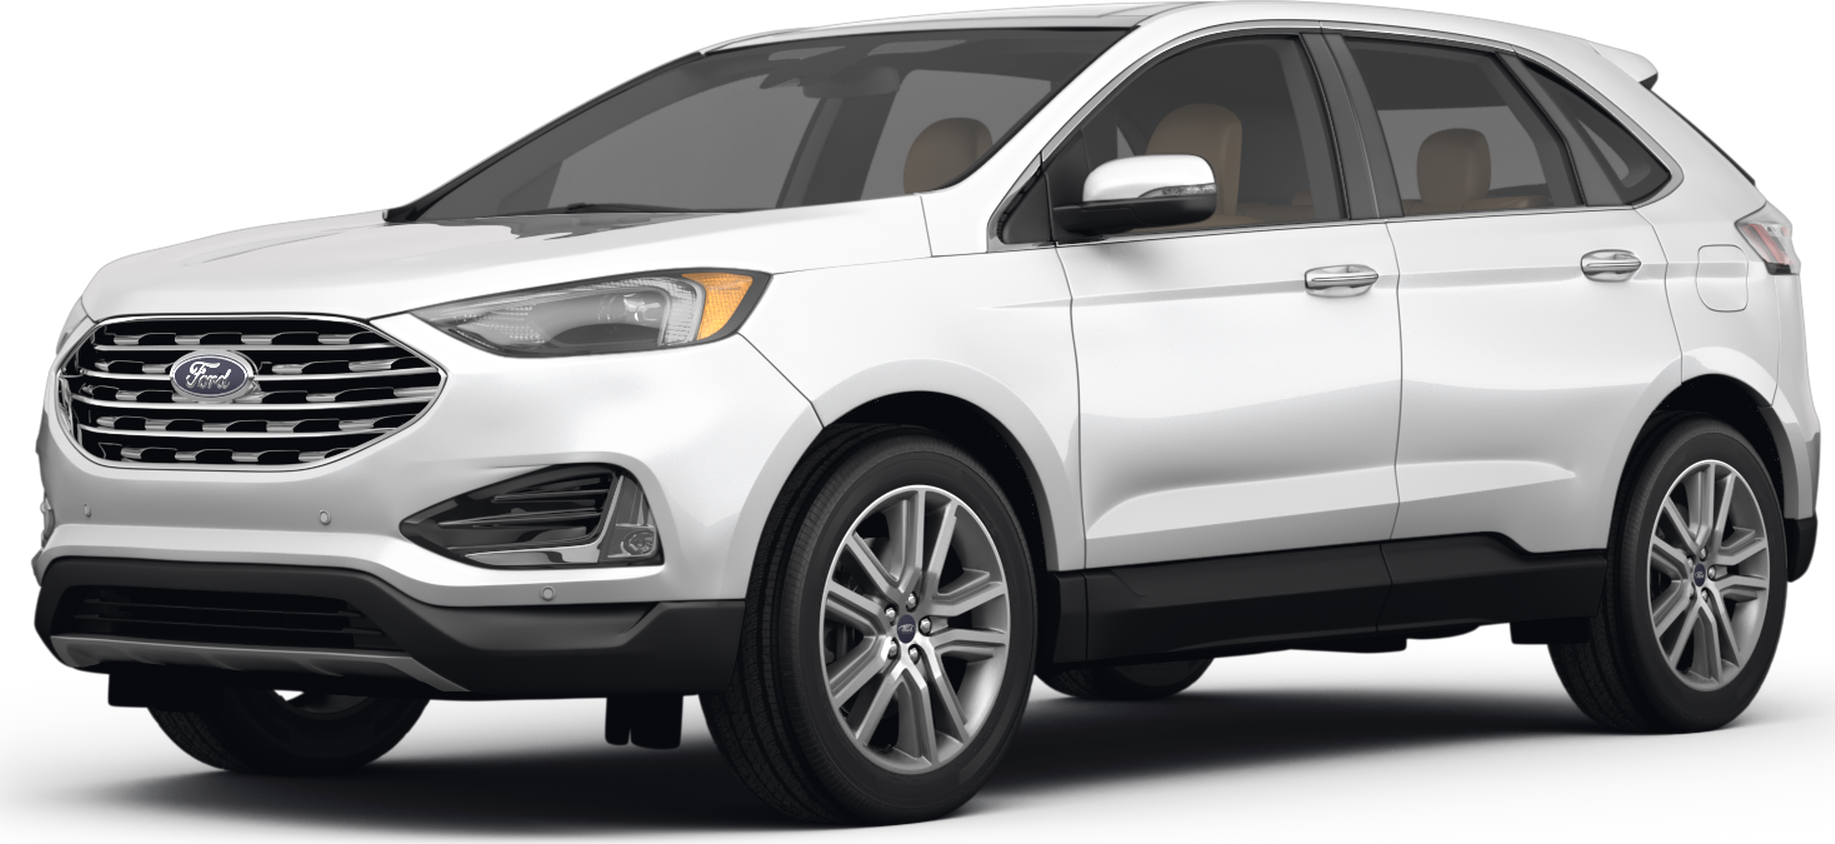 2022 Ford Edge Price Value Ratings And Reviews Kelley Blue Book